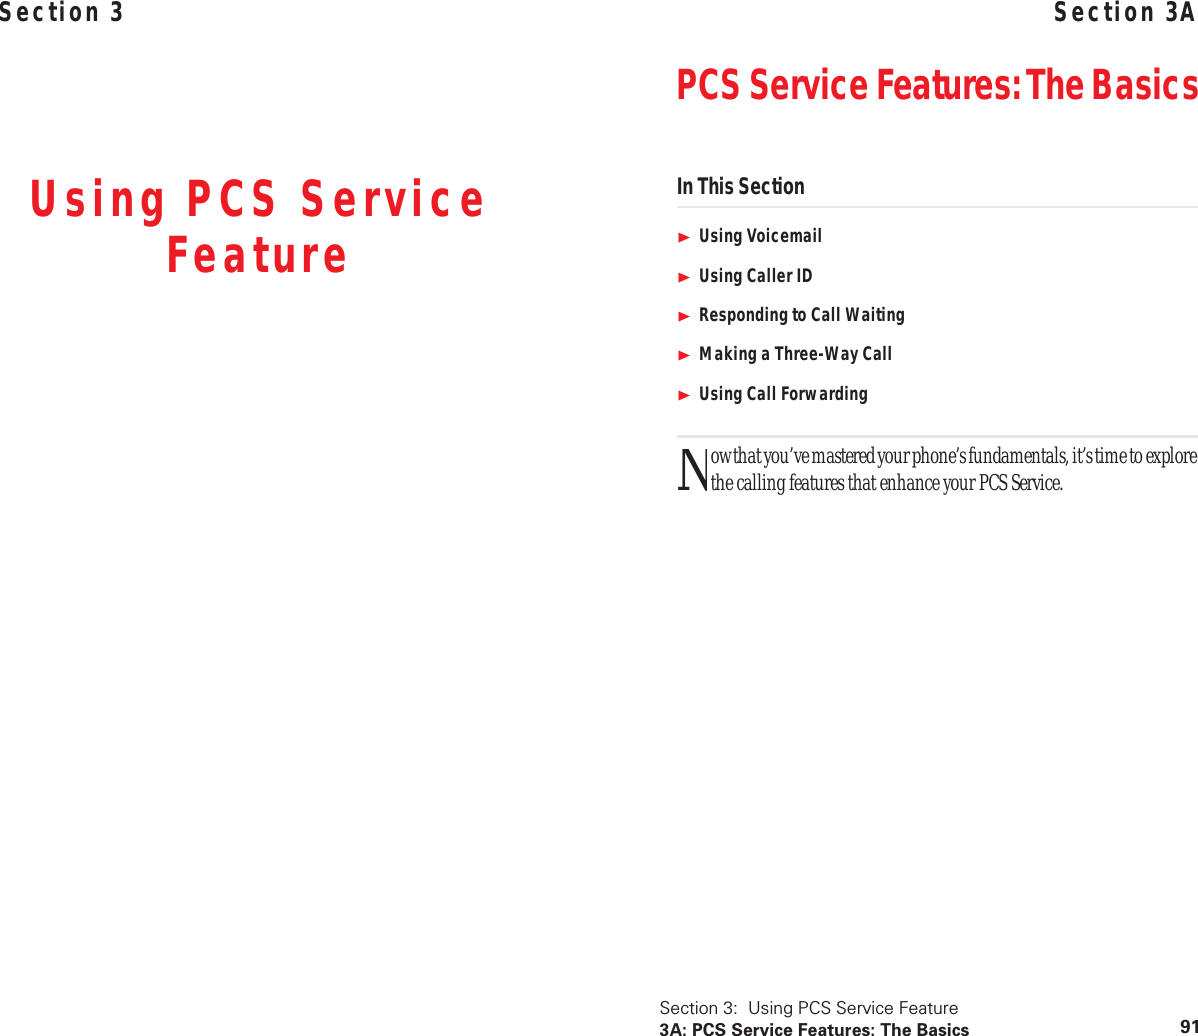 Section 3Using PCS Service FeatureSection 3:  Using PCS Service Feature3A: PCS Service Features: The Basics 91Section 3APCS Service Features: The BasicsIn This SectionUsing VoicemailUsing Caller IDResponding to Call WaitingMaking a Three-Way CallUsing Call Forwardingow that you’ve mastered your phone’s fundamentals, it’s time to explore the calling features that enhance your PCS Service.N